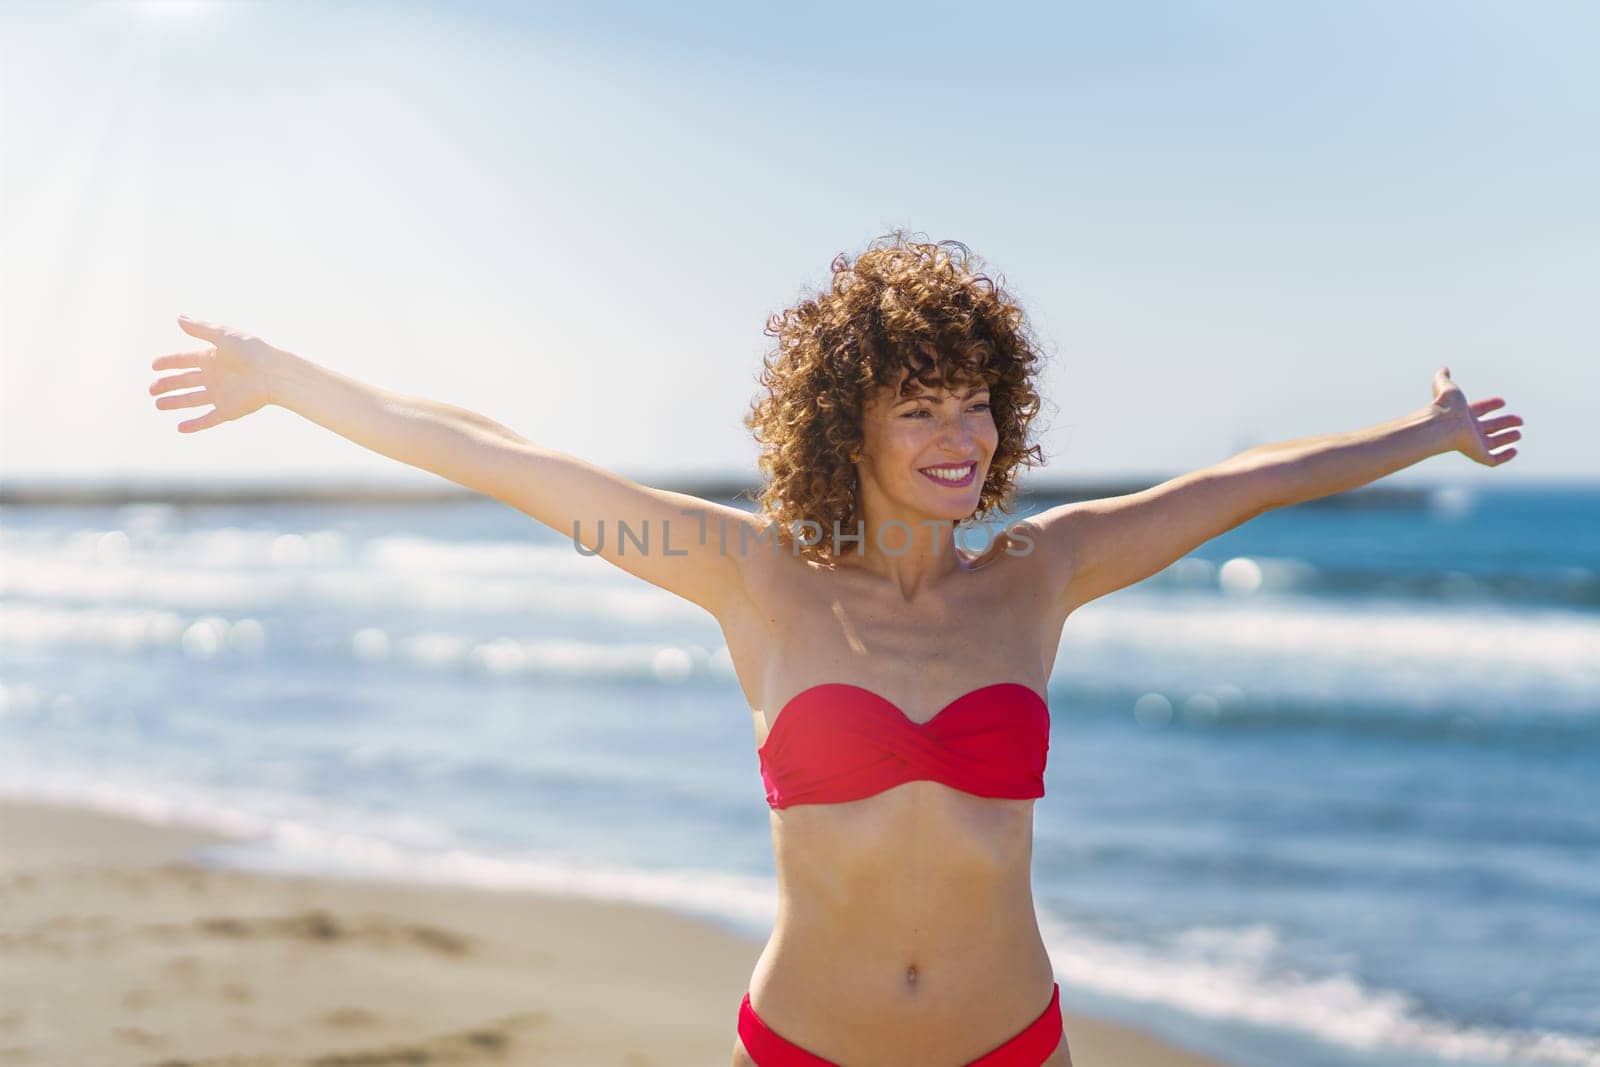 Cheerful young female with curly ginger hair in pink bikini, standing on sandy beach and smiling with outstretched arms in sunlight while looking away against blurred and reflecting blue seawater